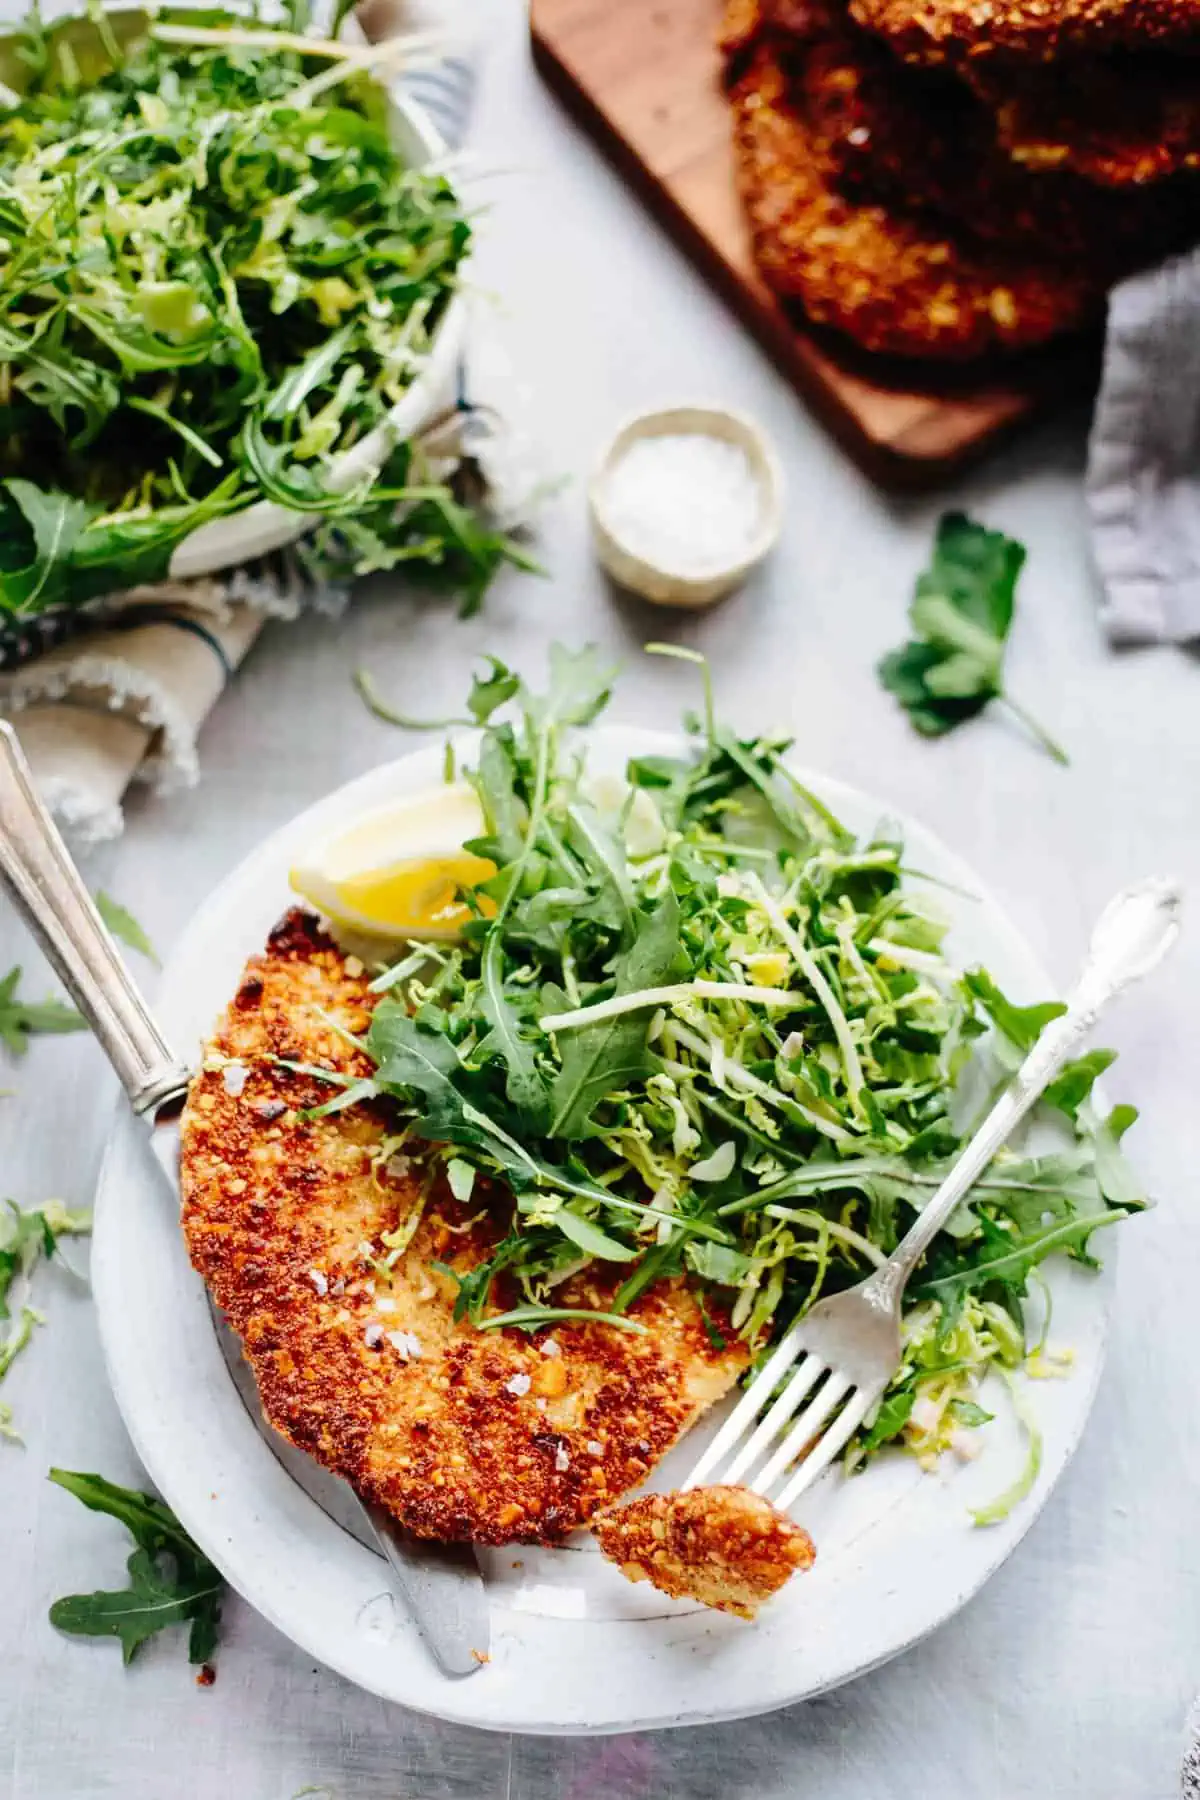 Almond Chicken Cutlets with Apple, Arugula + Brussels Sprout Salad. Gluten free, pan fried chicken cutlets, flavored with Dijon mustard and served with a crisp and refreshing apple, shaved Brussels sprout and arugula salad! #easy #chicken #cutlet #recipe #dijon #apple #brussels #salad #arugula #glutenfree #almond #crispy #healthy | ColeyCooks.com